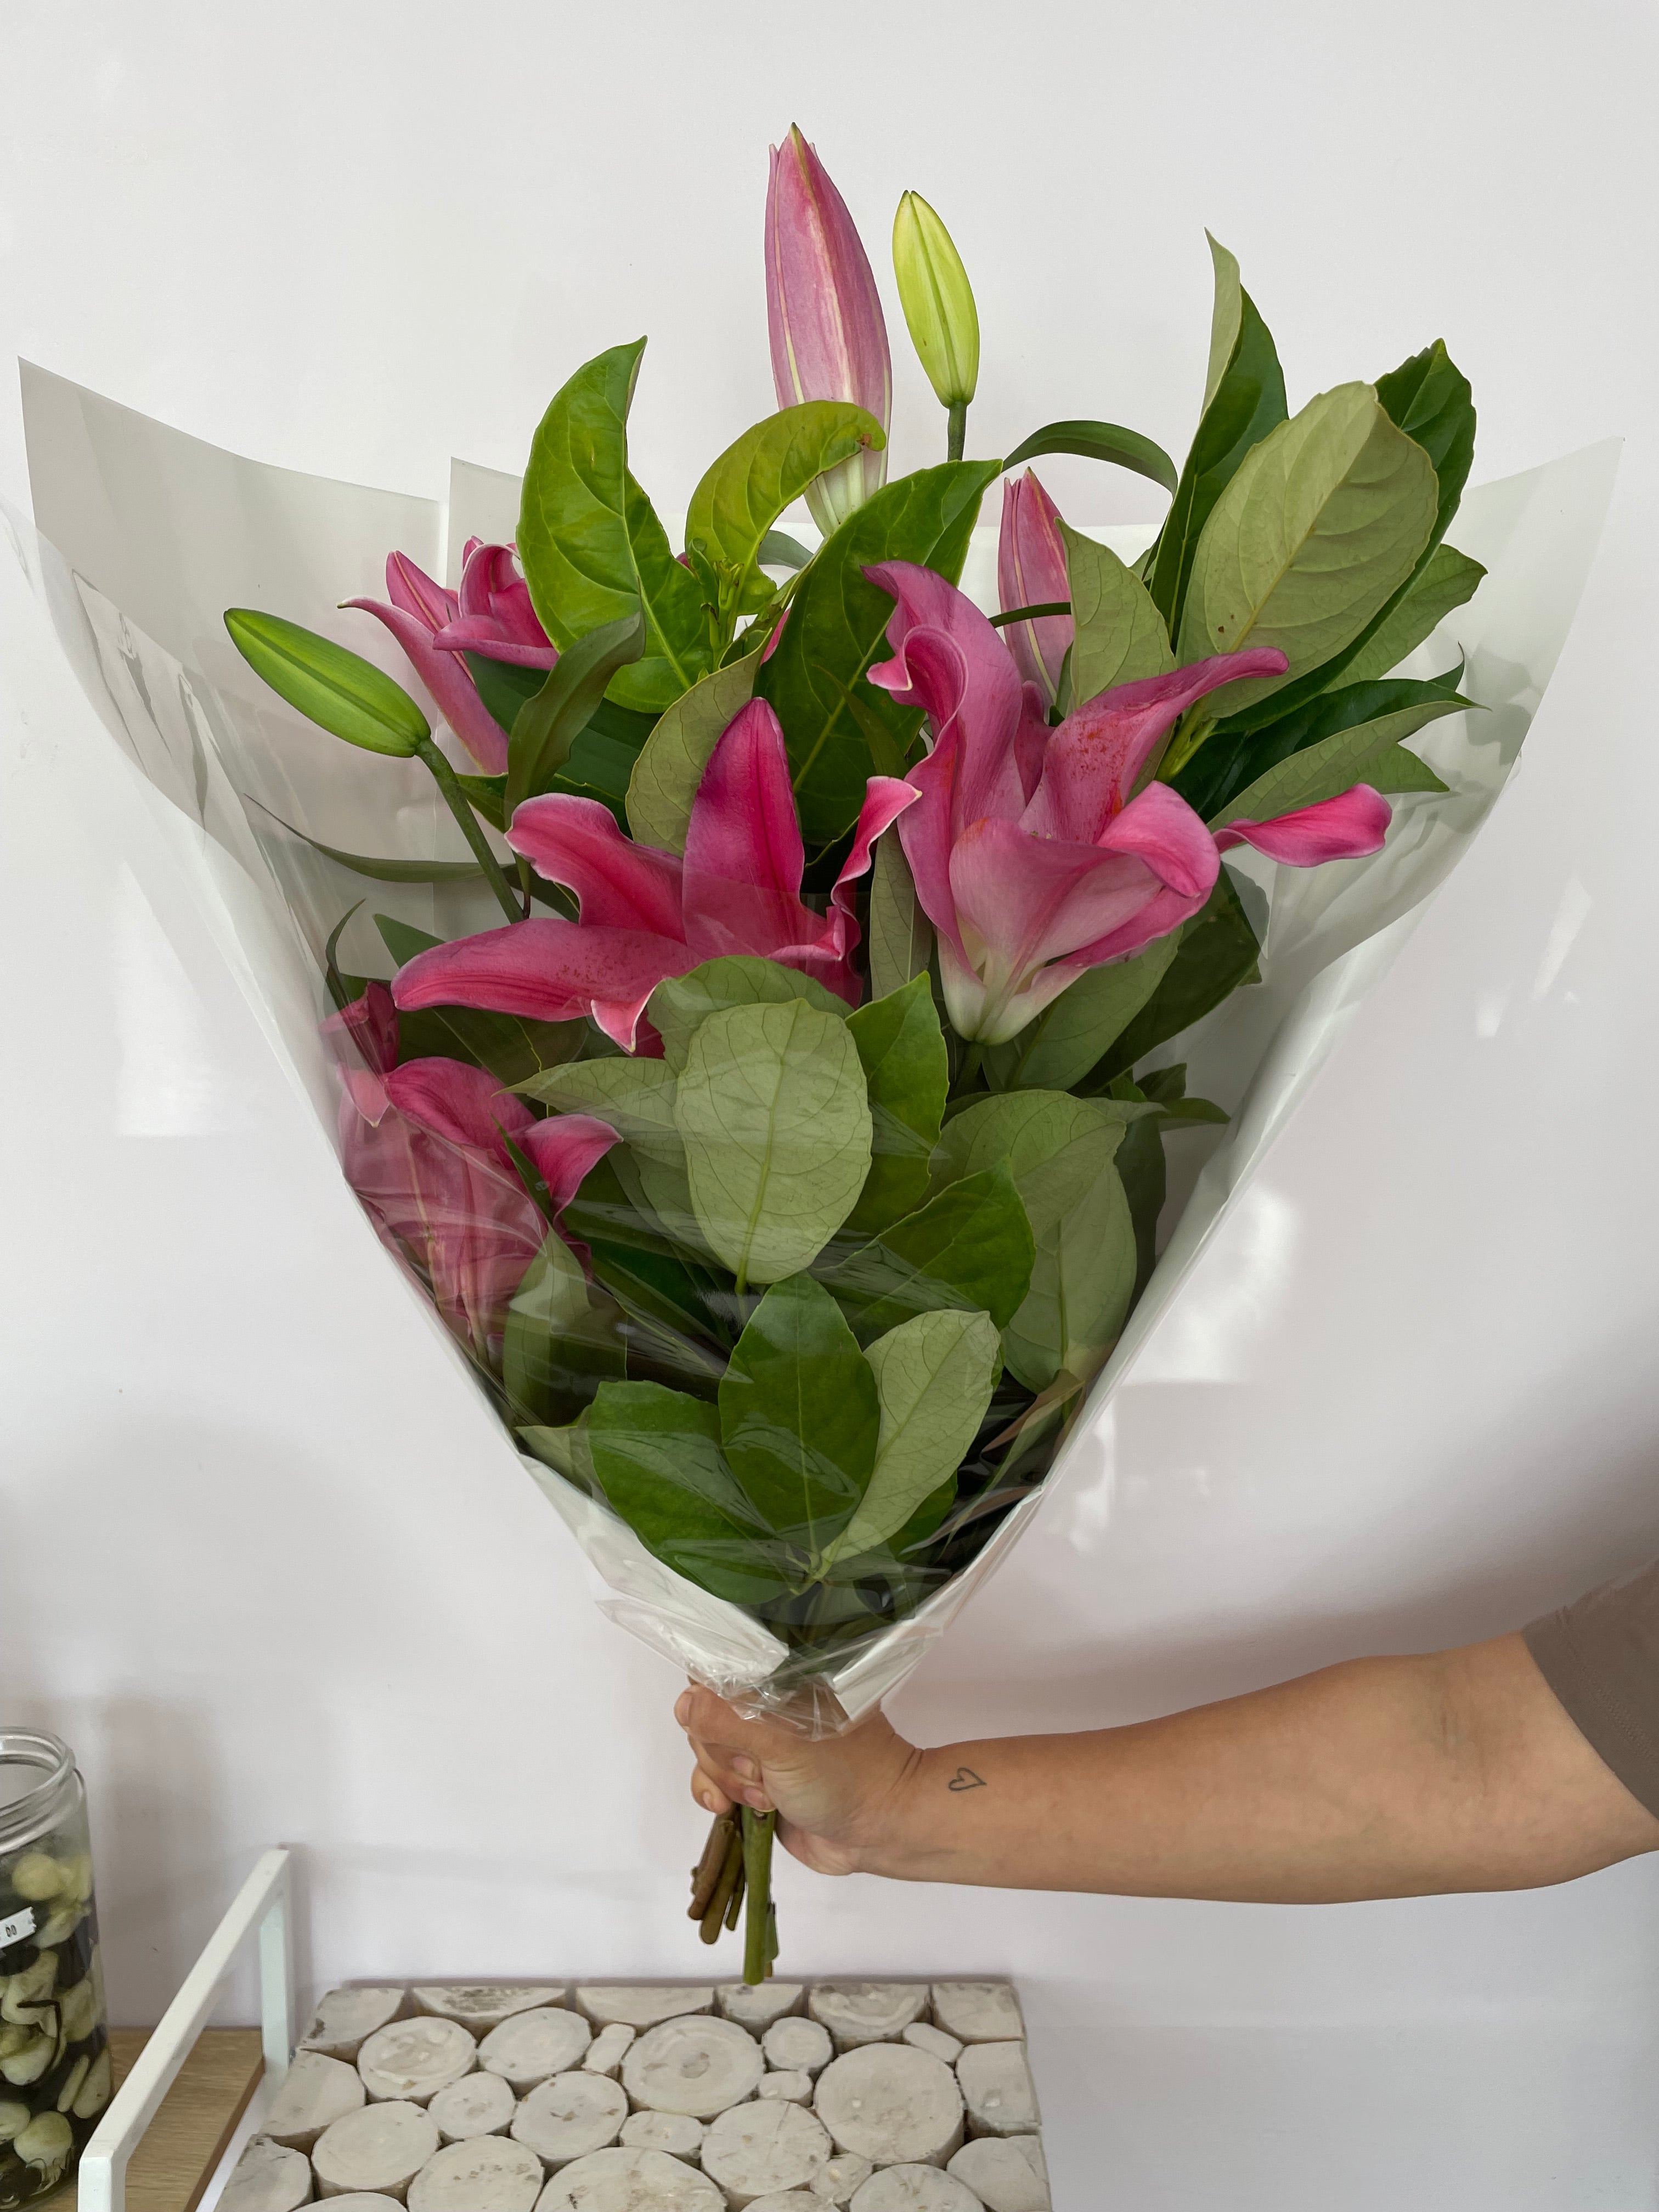 Flower delivery perth - lilies - fresh flowers